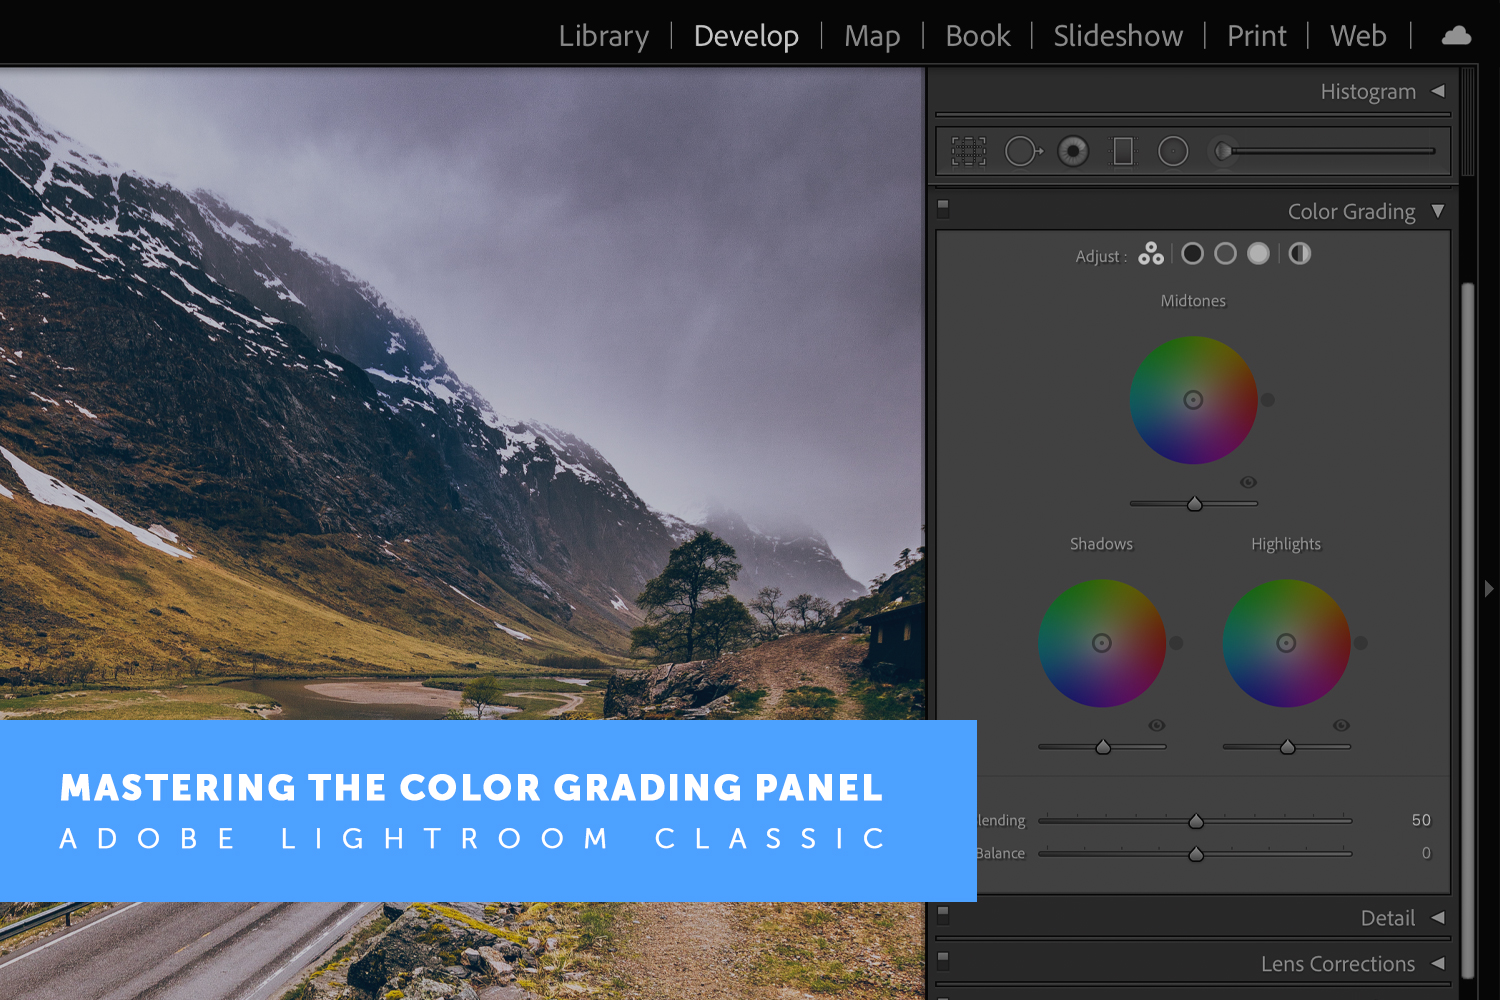 How to Use the New Color Grading Panel in Adobe Lightroom Classic